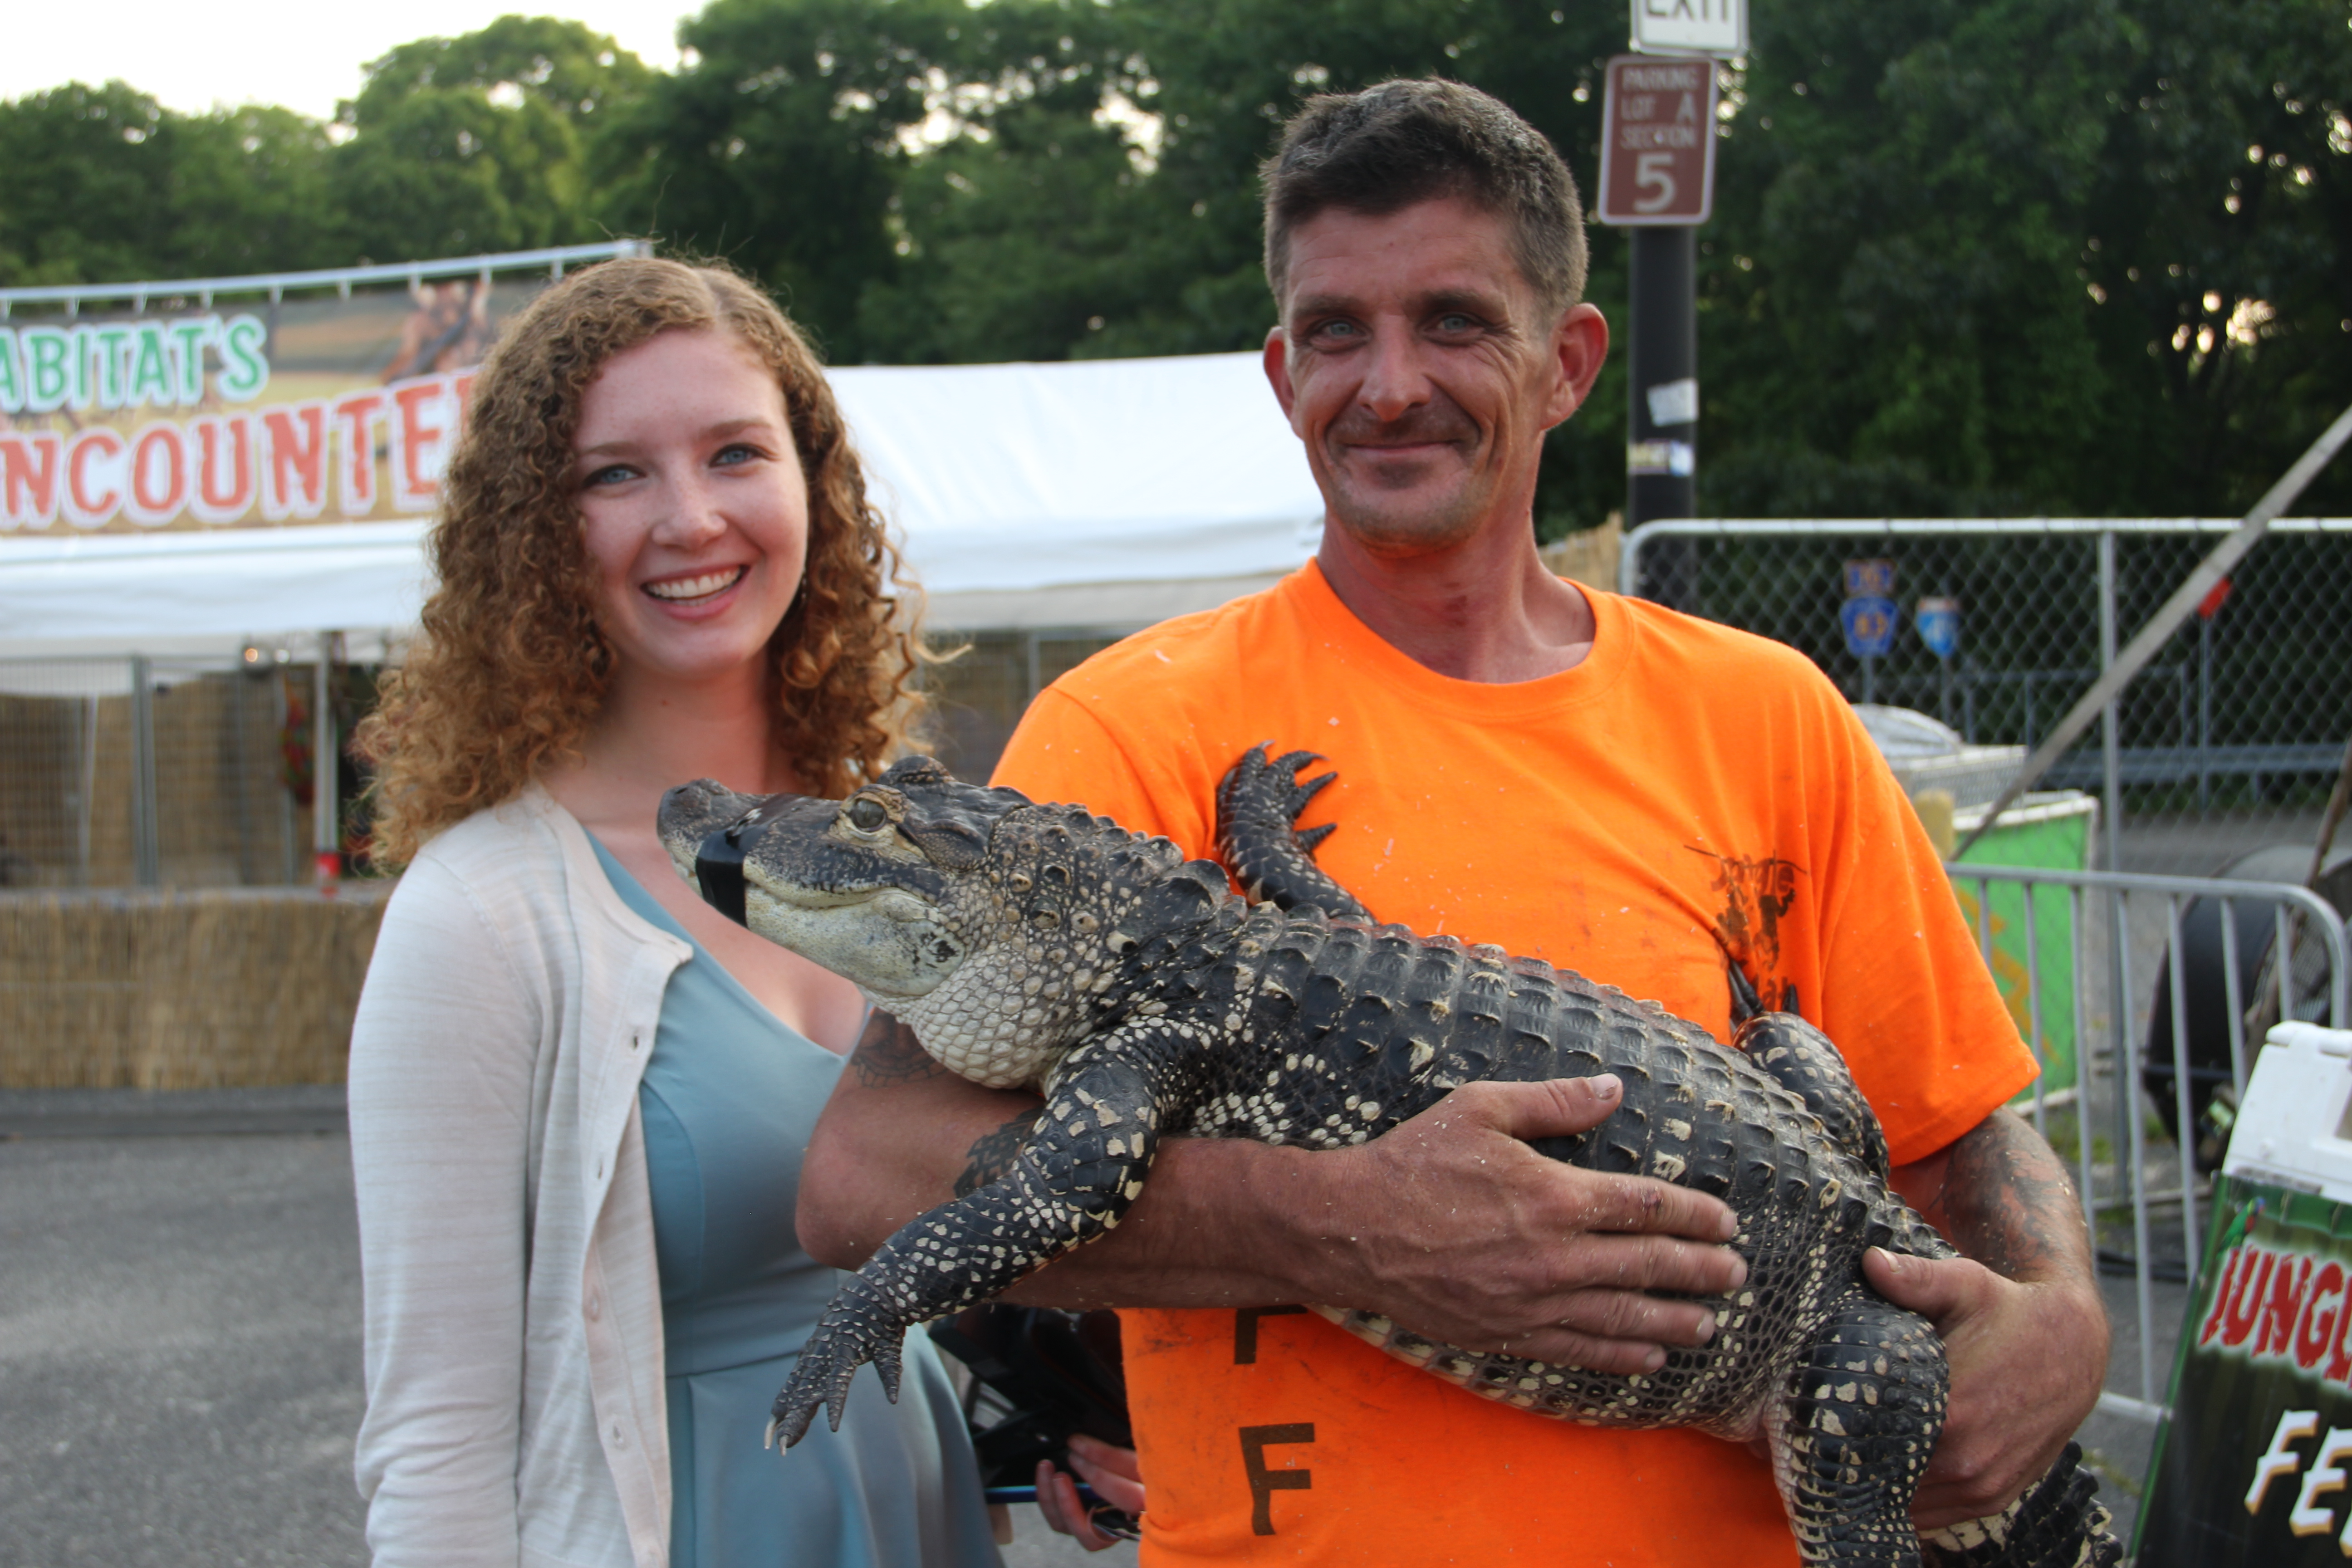 One of our Summer 2015 interns Tara with a gator handler at the 2015 Brookhaven Town Fair.